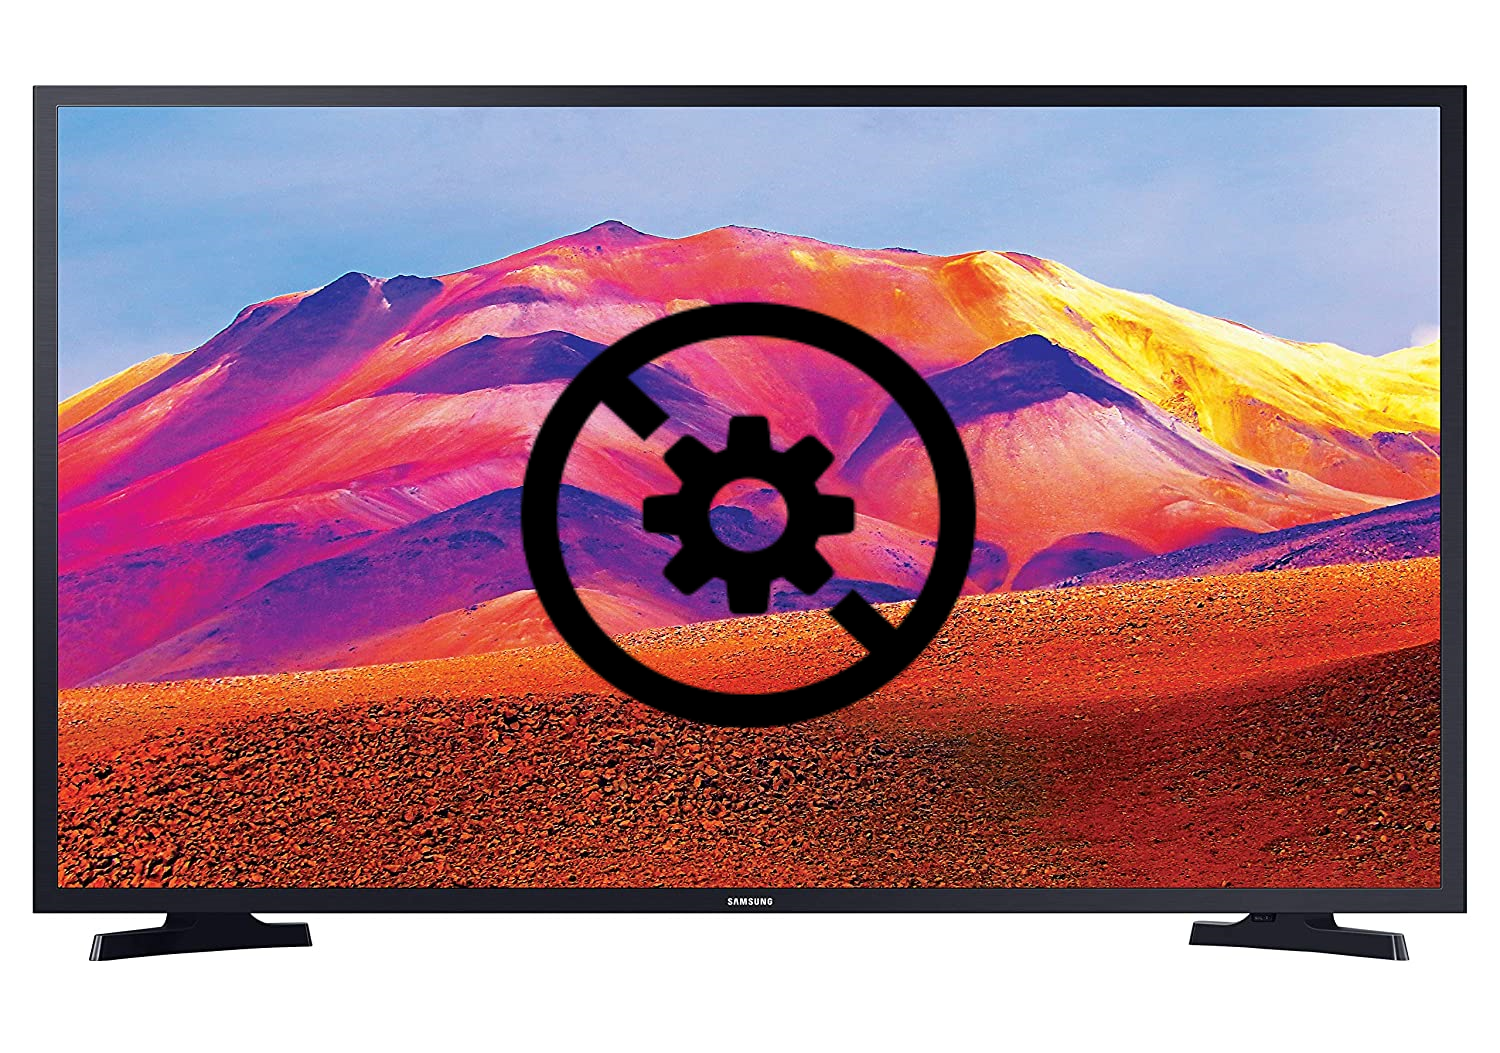 Samsung TV Turns on by Itself (Here's Why & How to STOP It!)